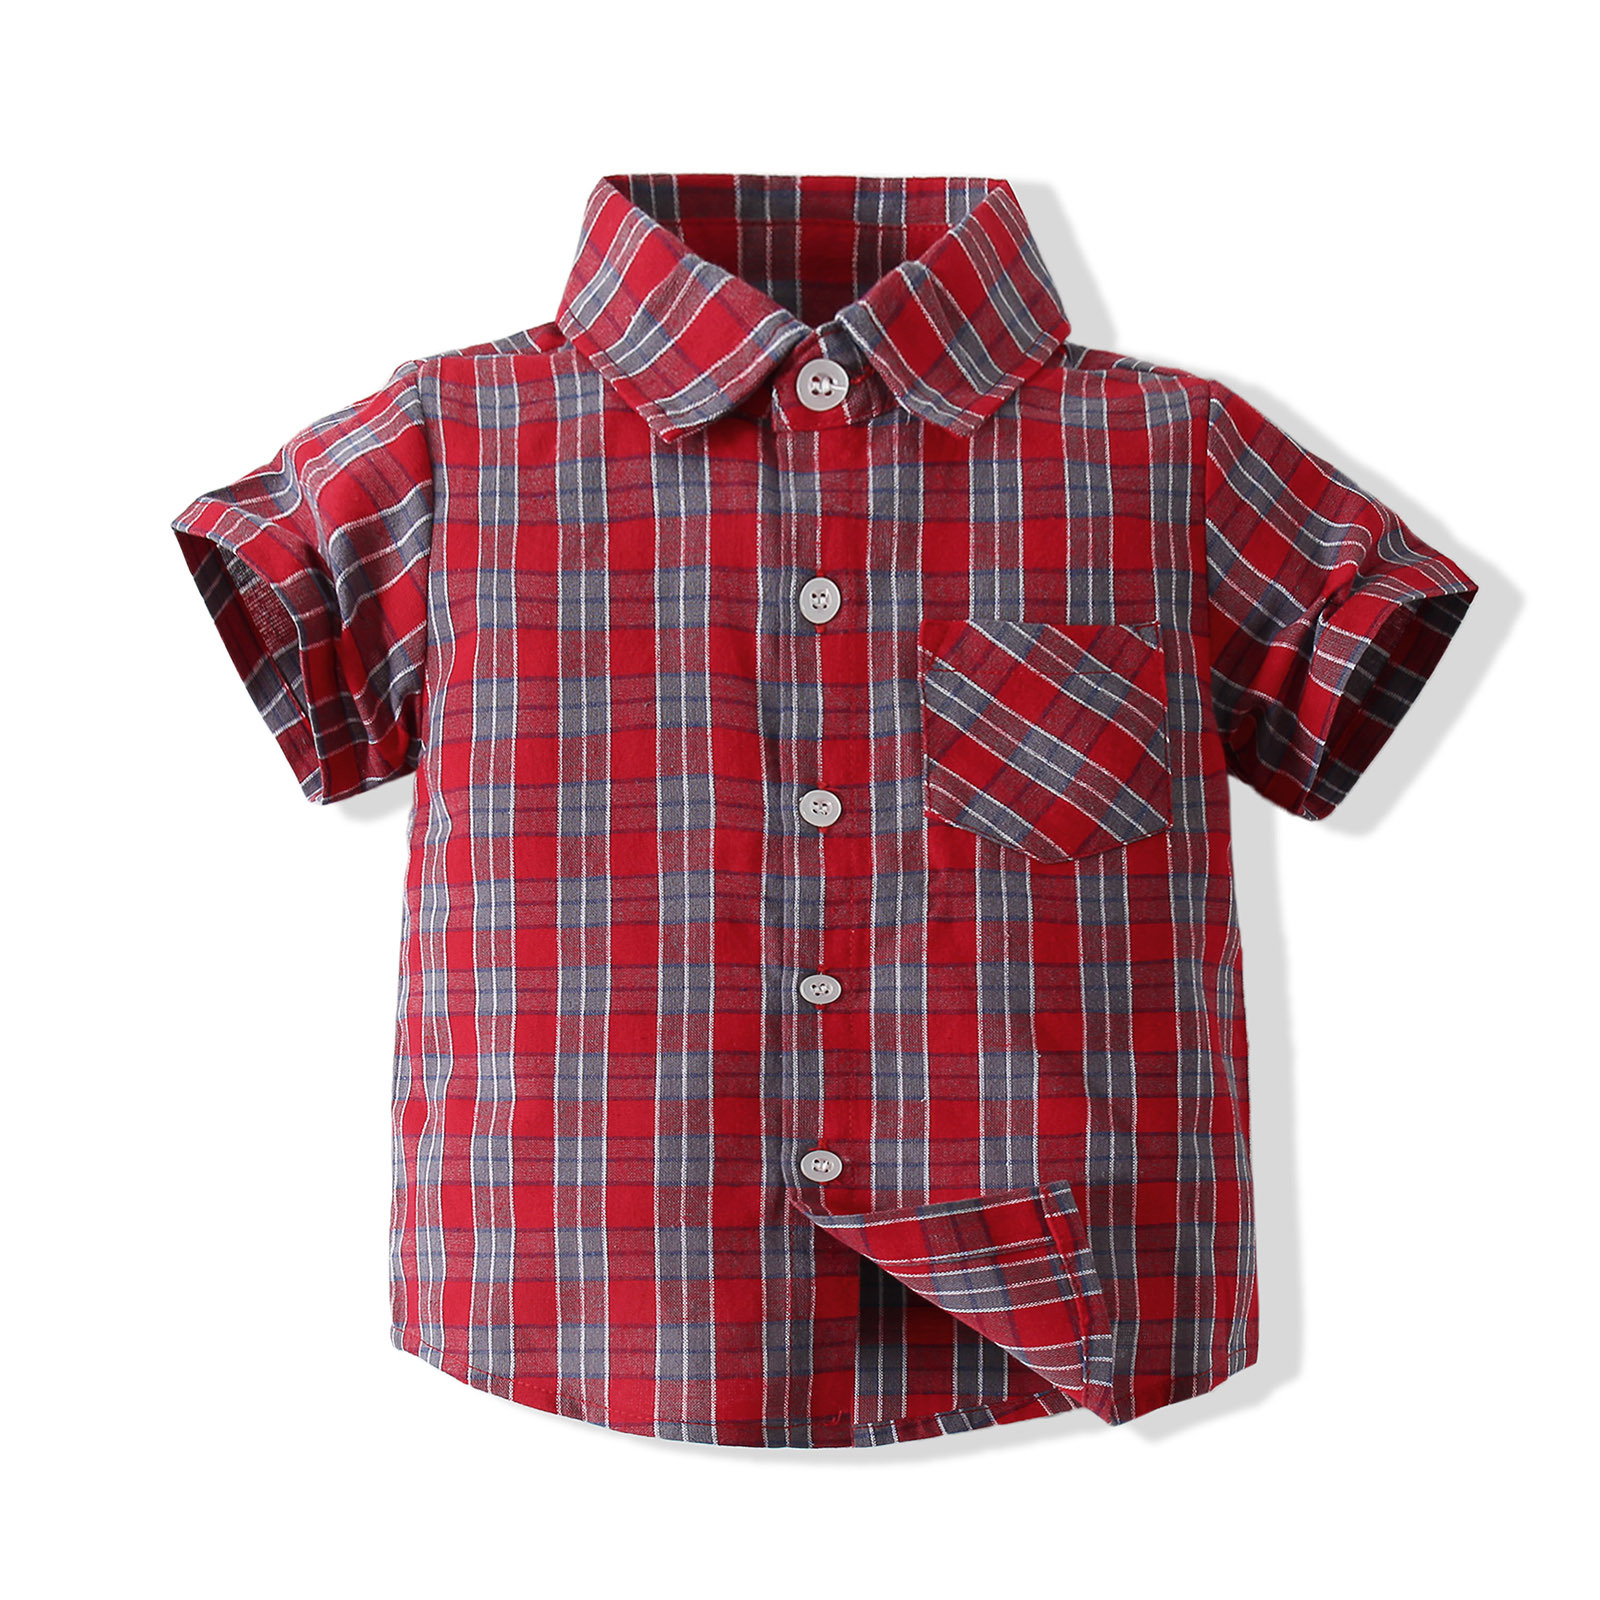 Baby Summer New Suit Boy Short-sleeved Plaid Shirt Pants Children's Clothing